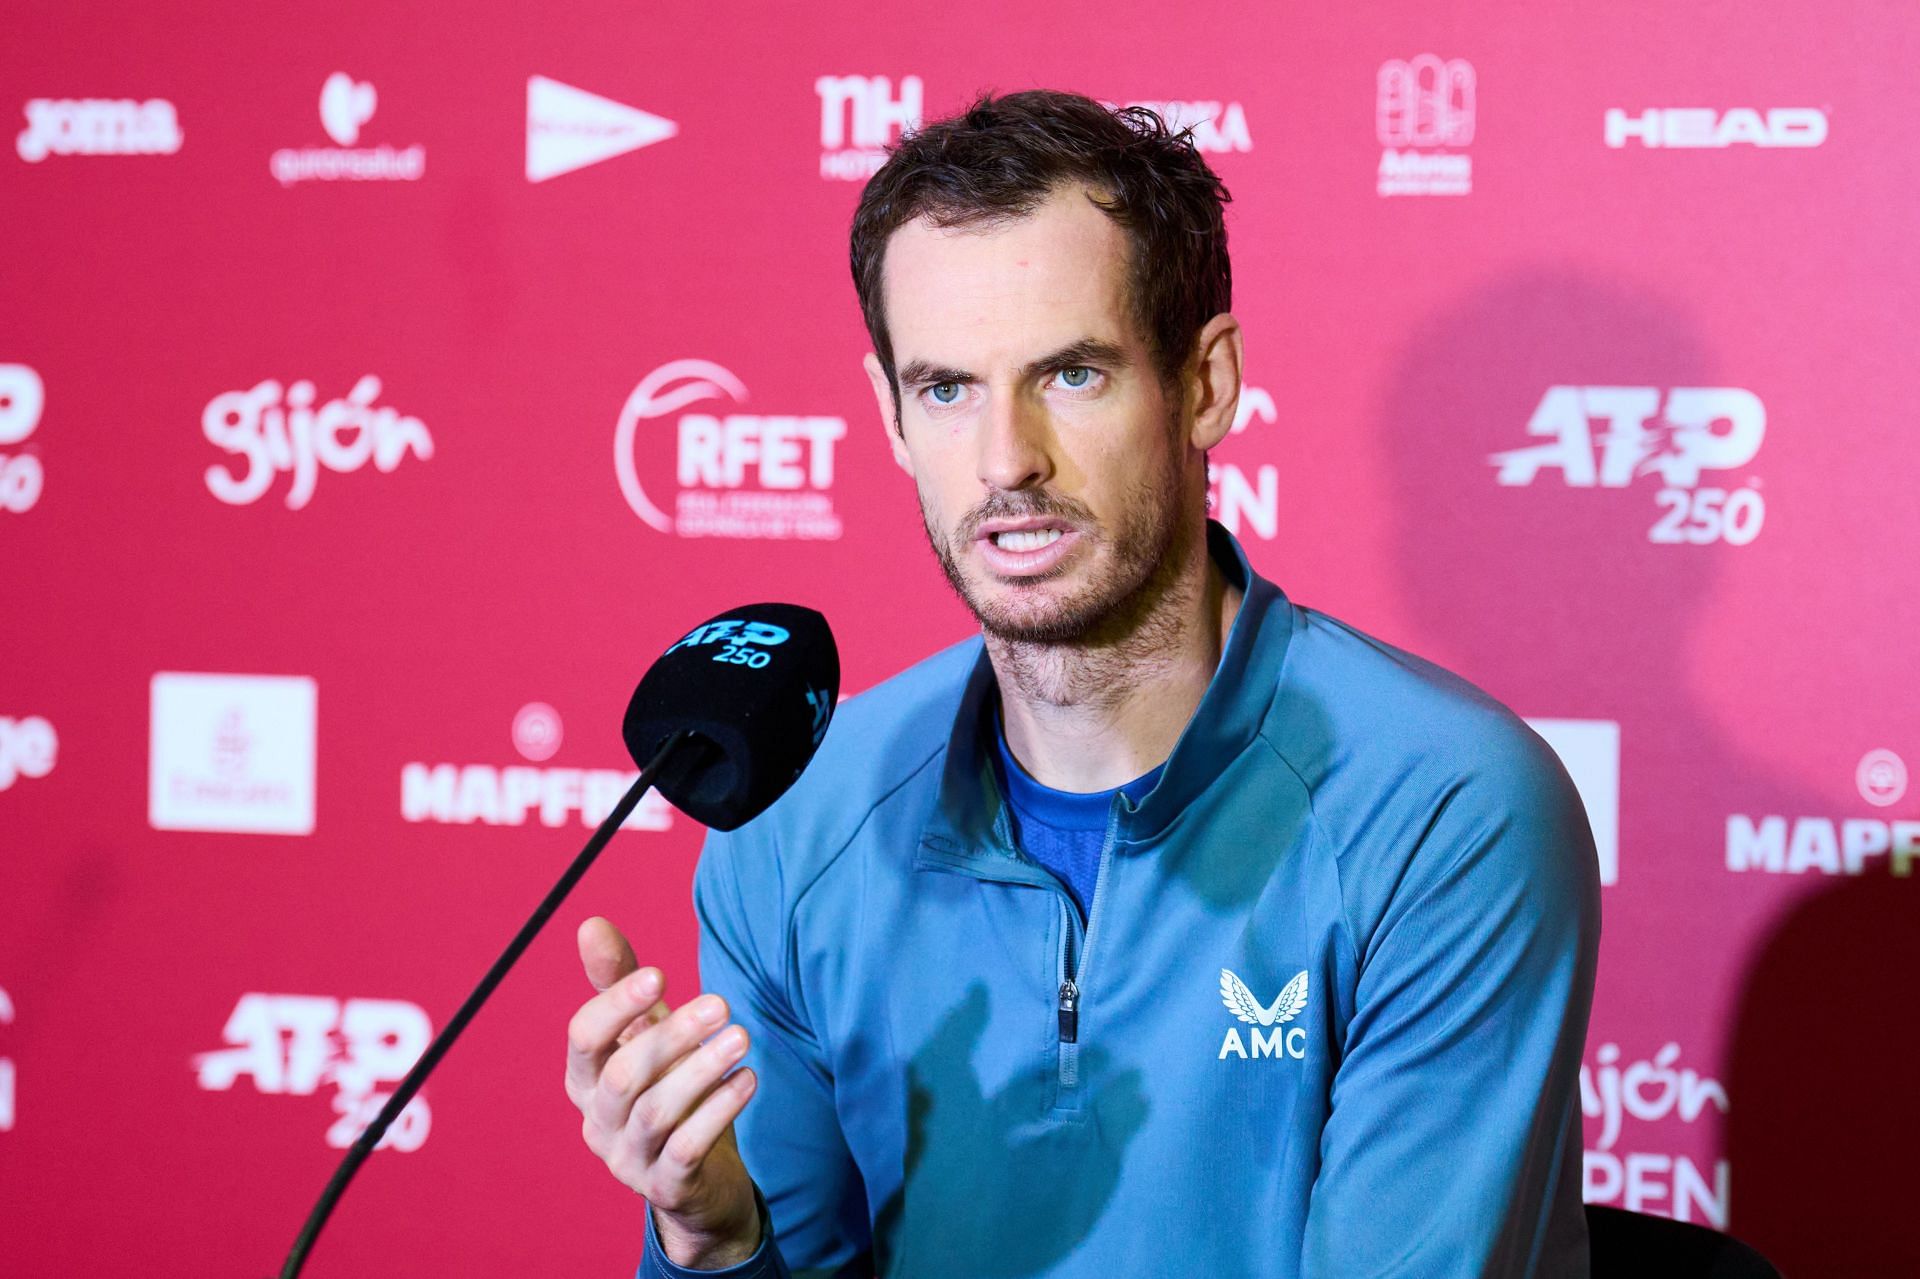 Andy Murray at the Gijon Open